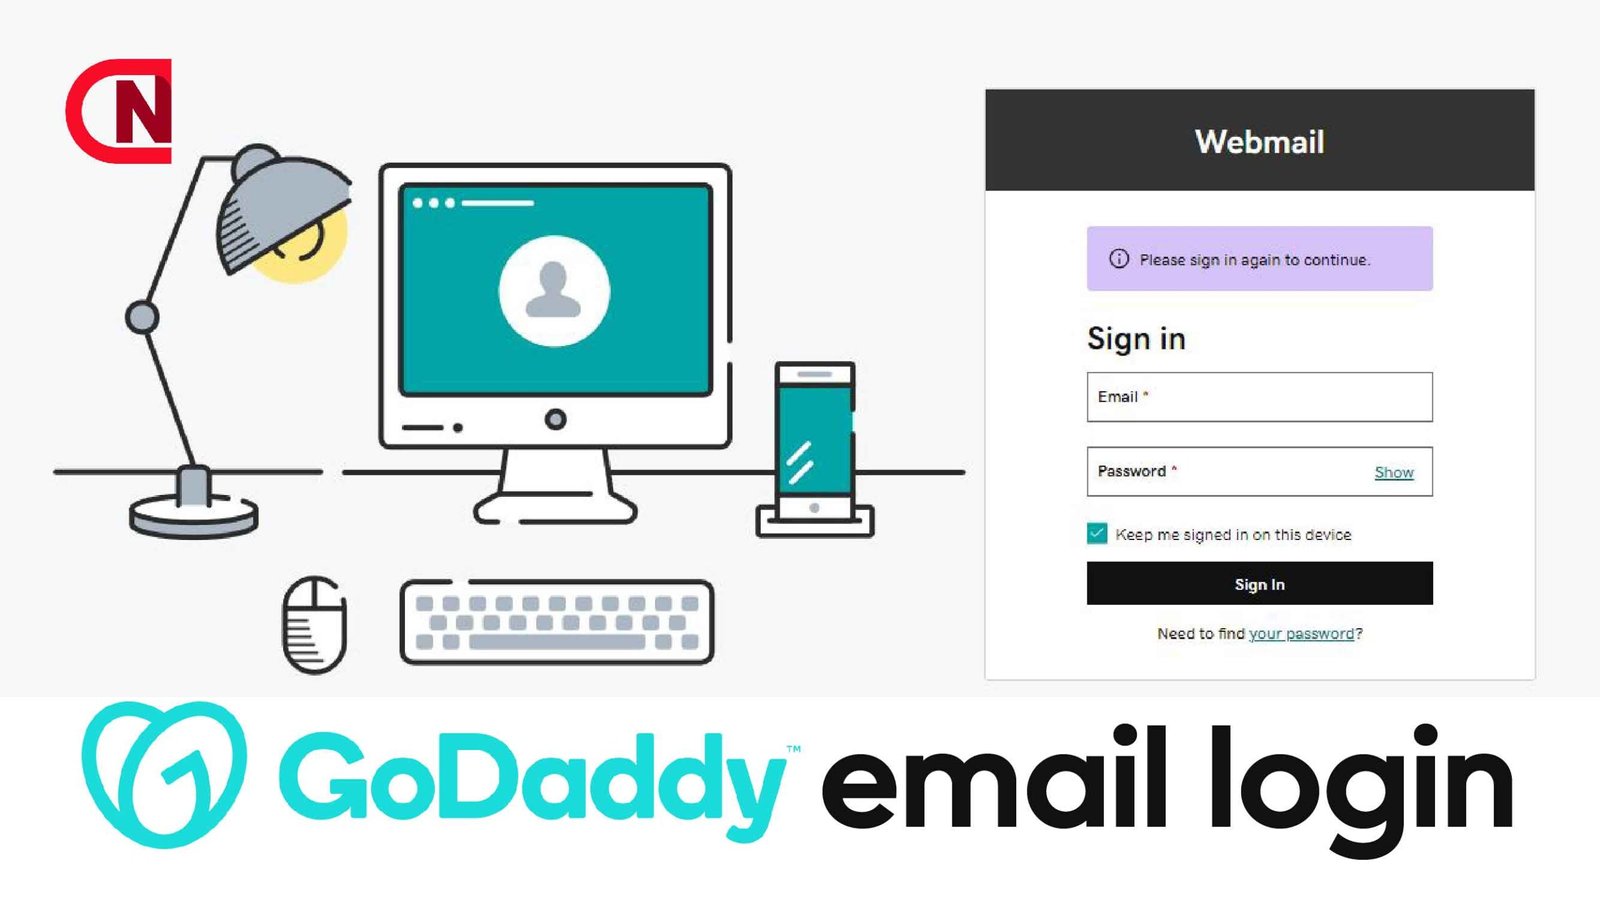 What Are the Steps for GoDaddy Email Login on a New Device